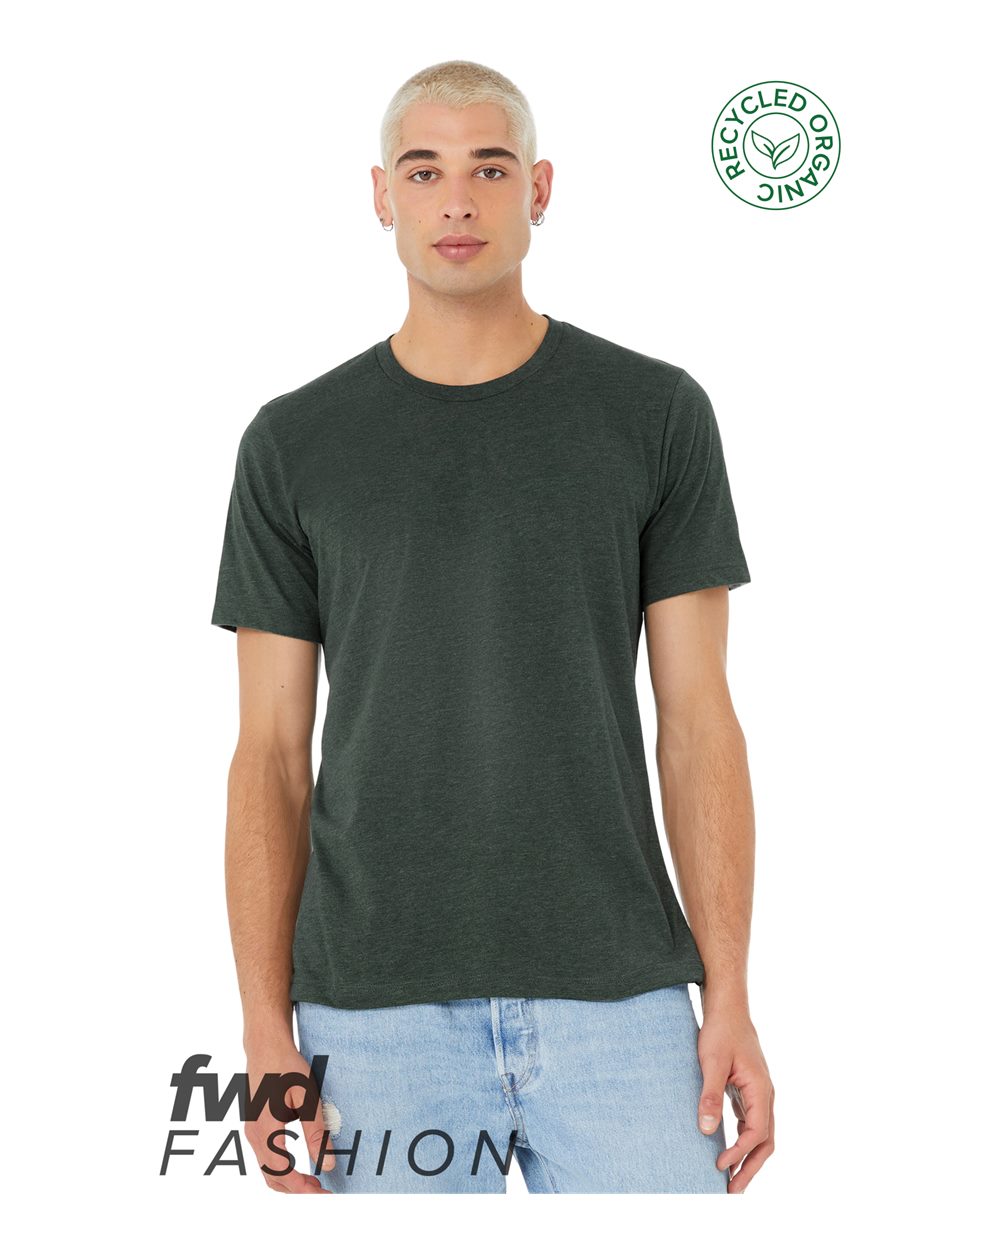 BELLA + CANVAS - FWD Fashion Jersey Recycled Organic Tee - 3001RCY